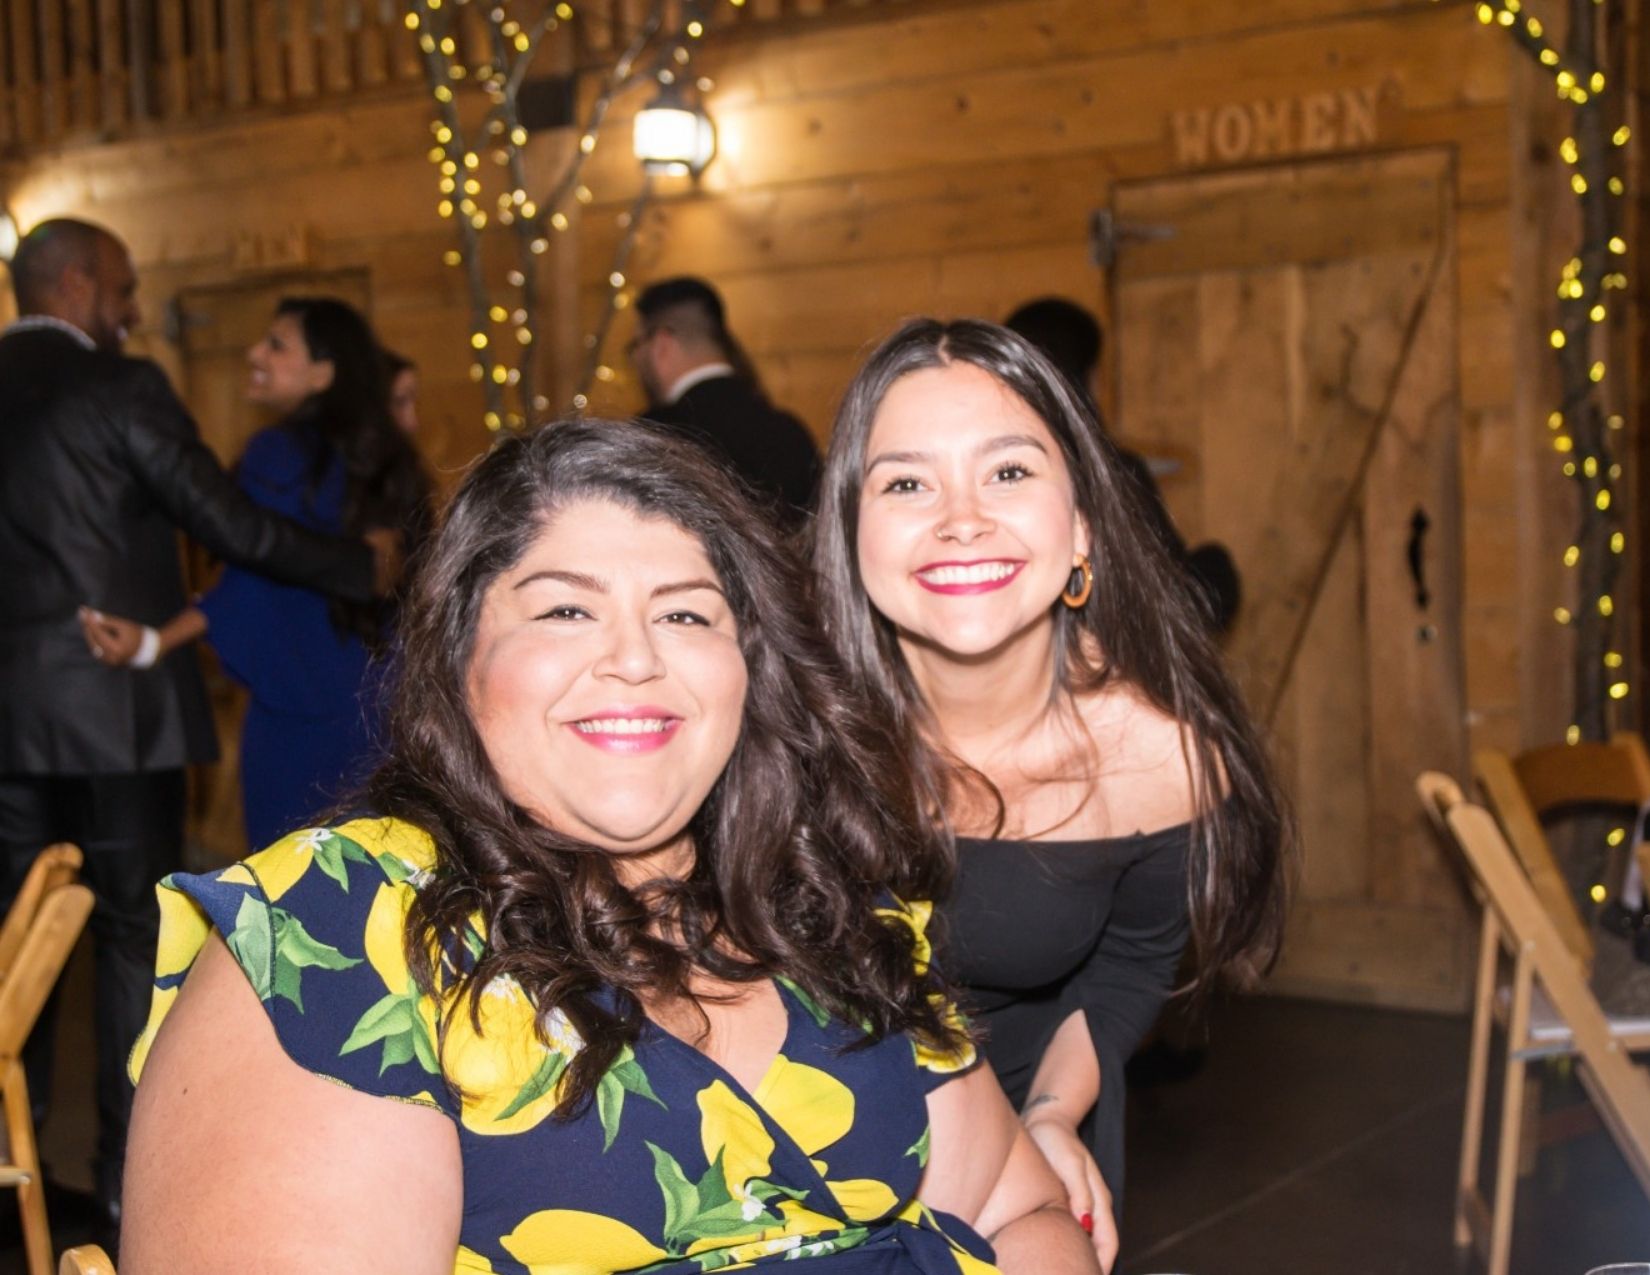 Two Latinx Employee Impact members smile for the camera at an event.